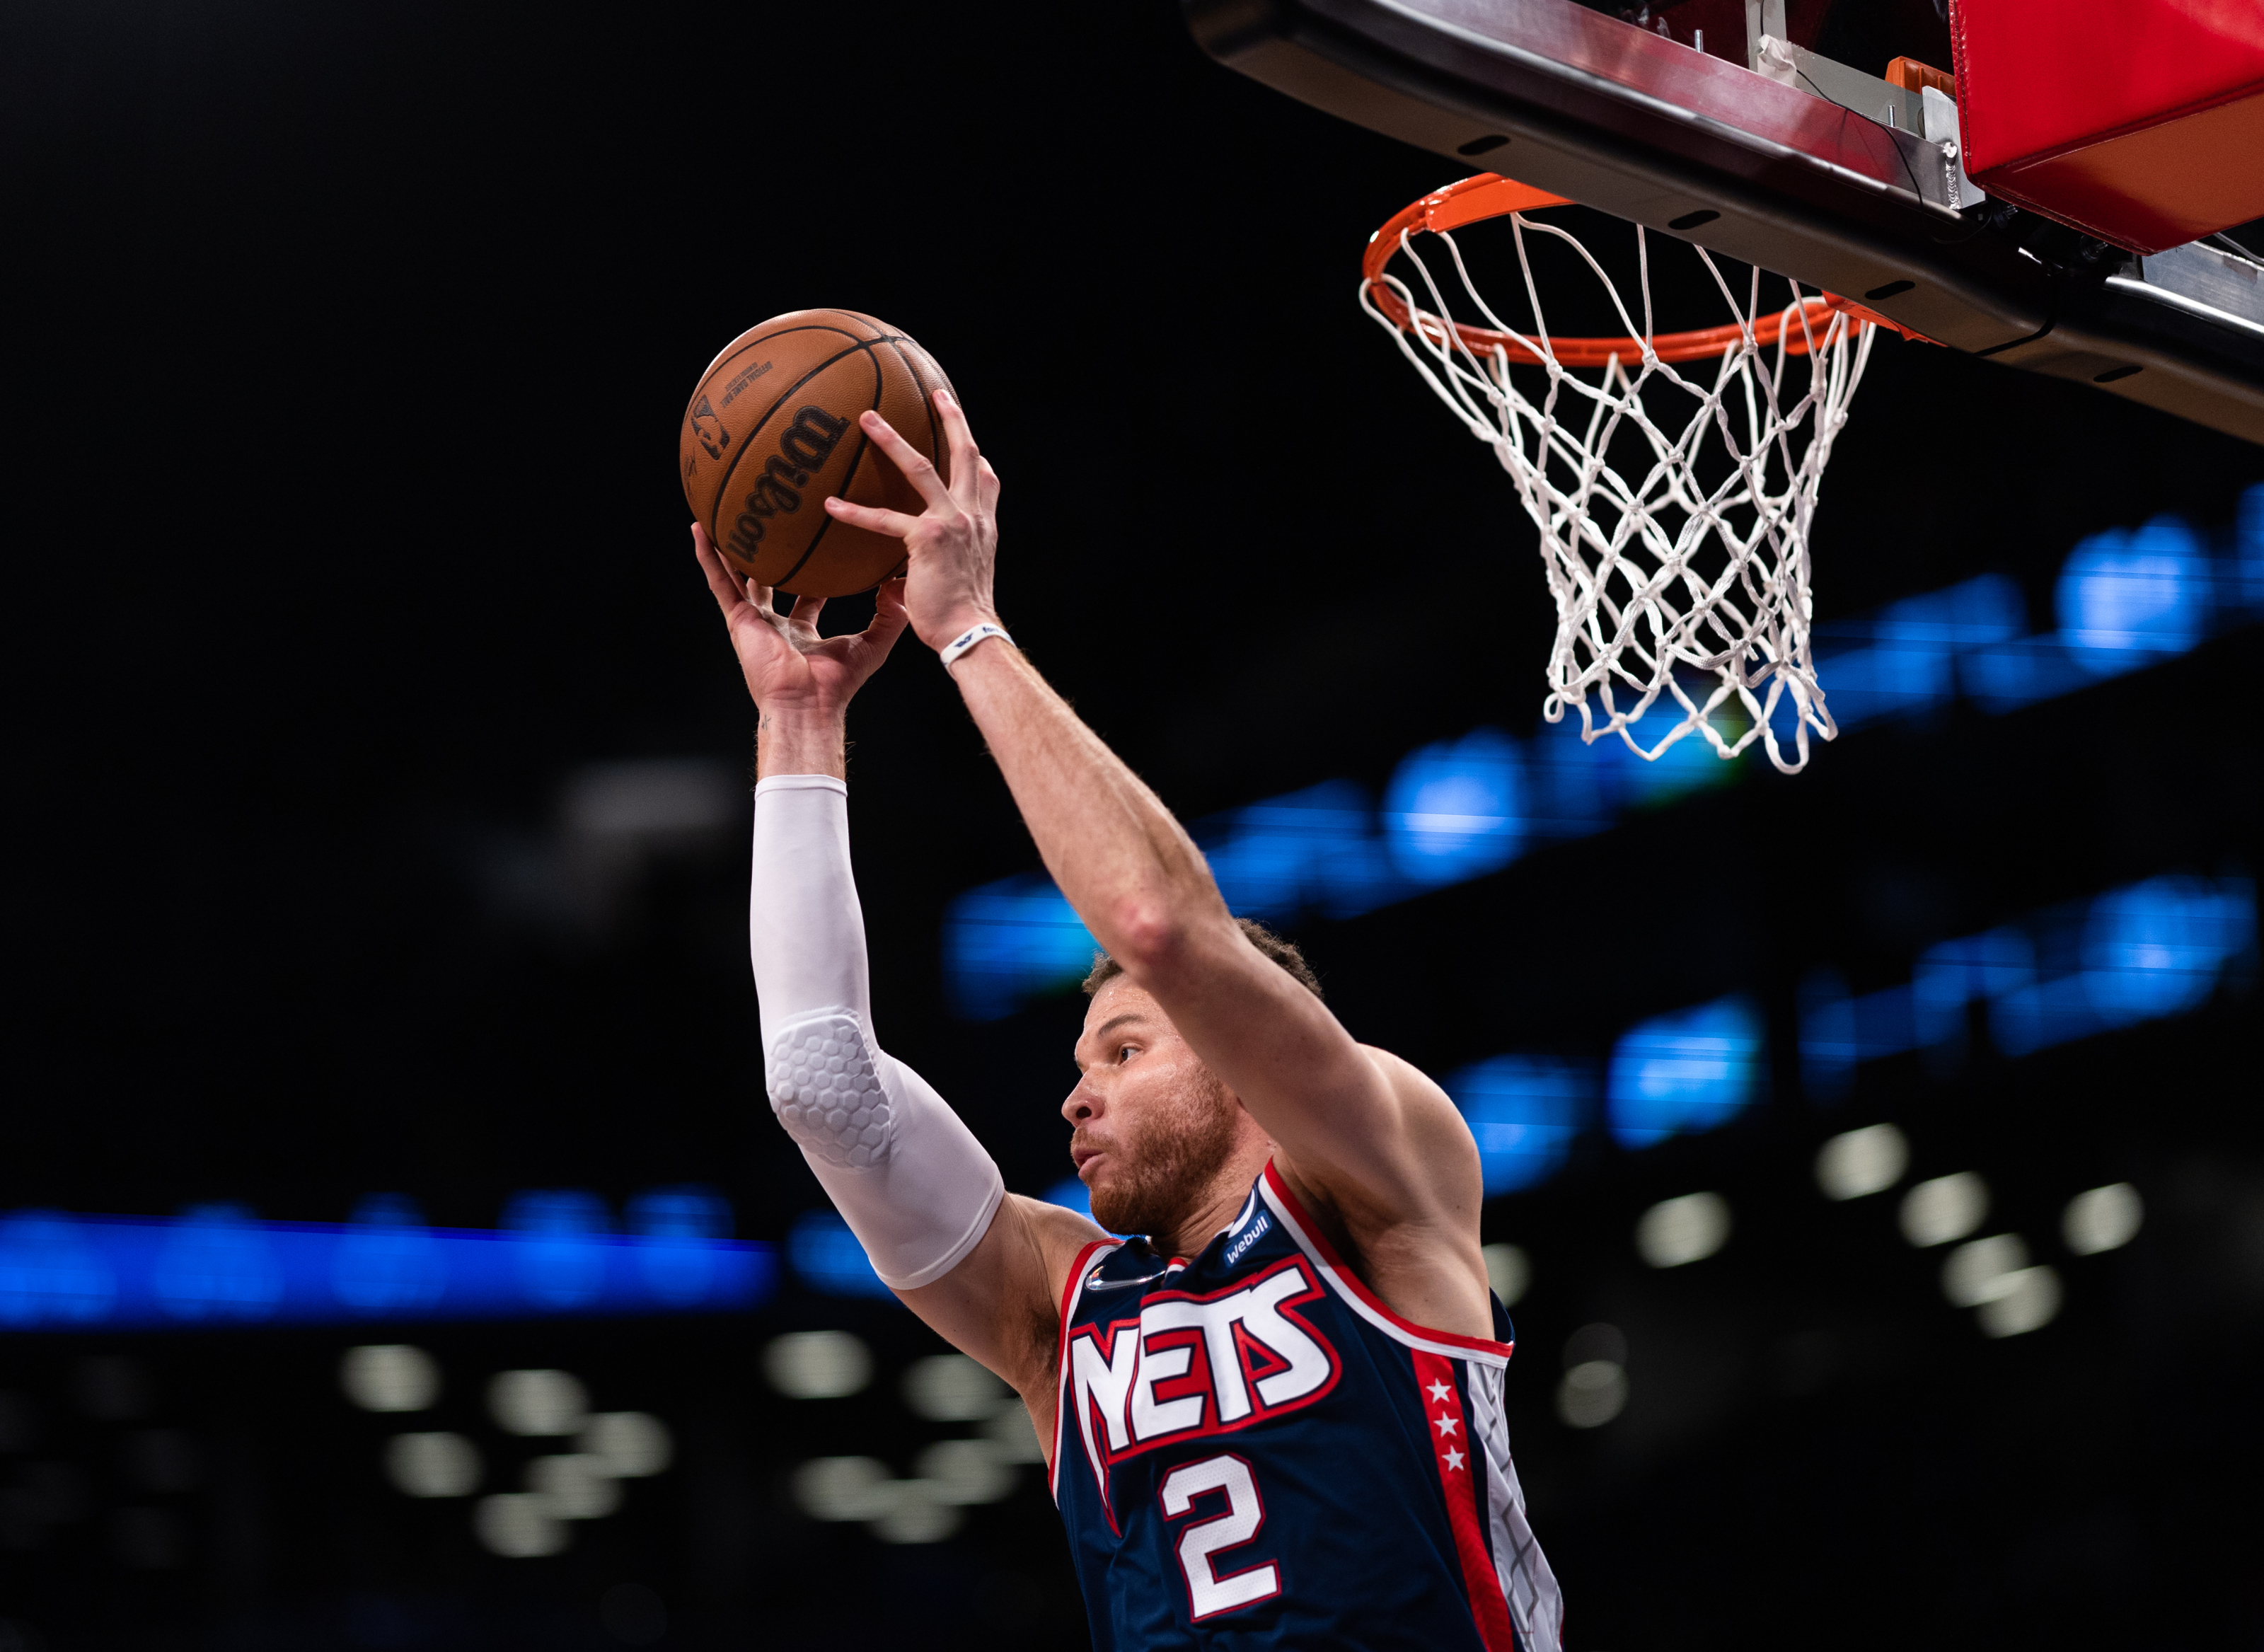 Blake Griffin dunk on Nets debut ends 464-day drought, takes social media  by storm: WATCH